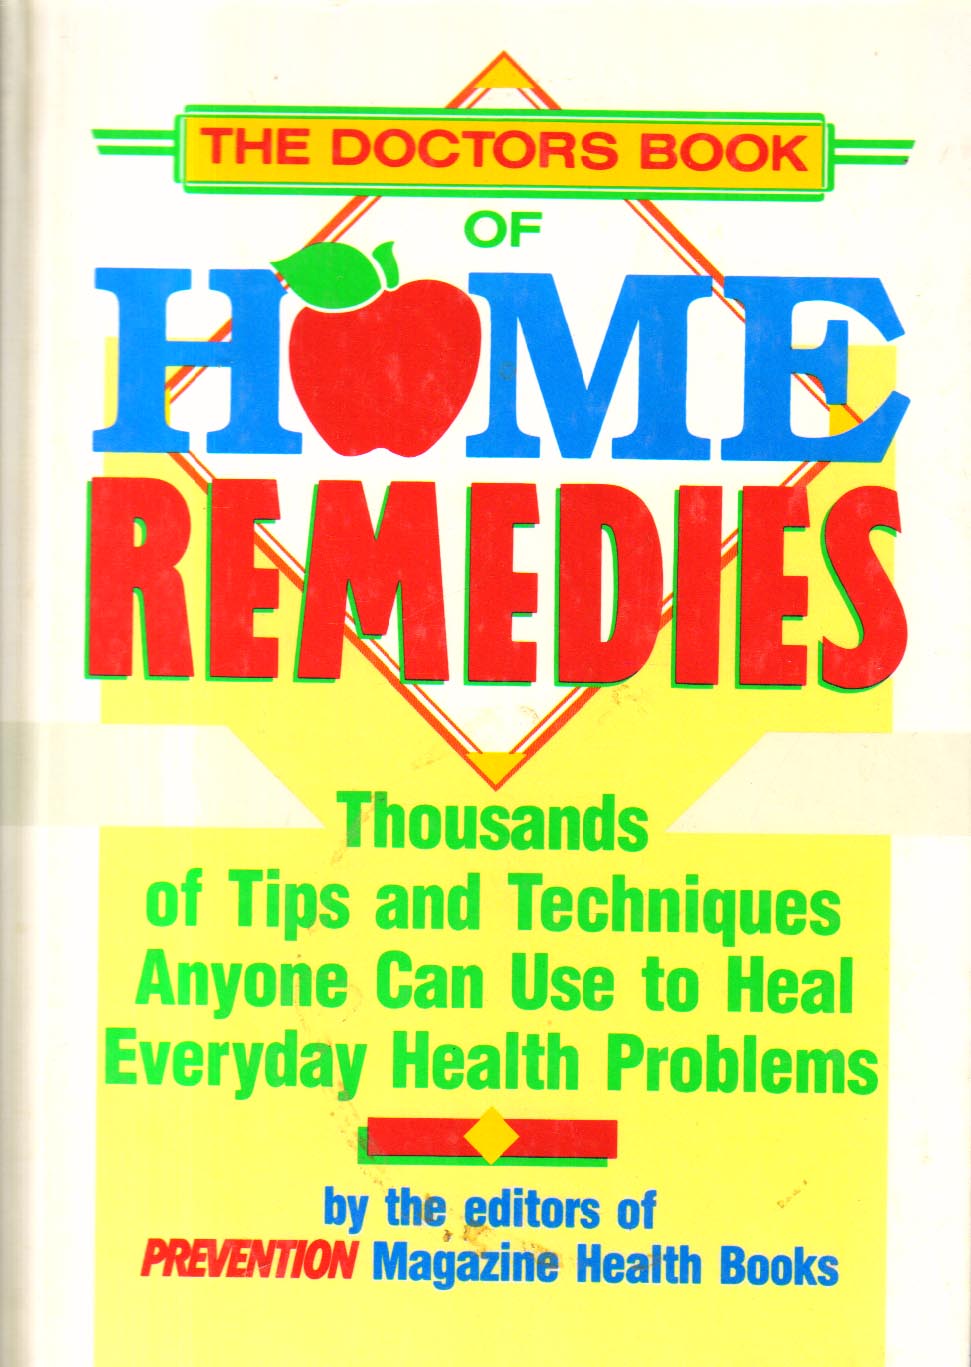 The Doctors book of Home Remedies.